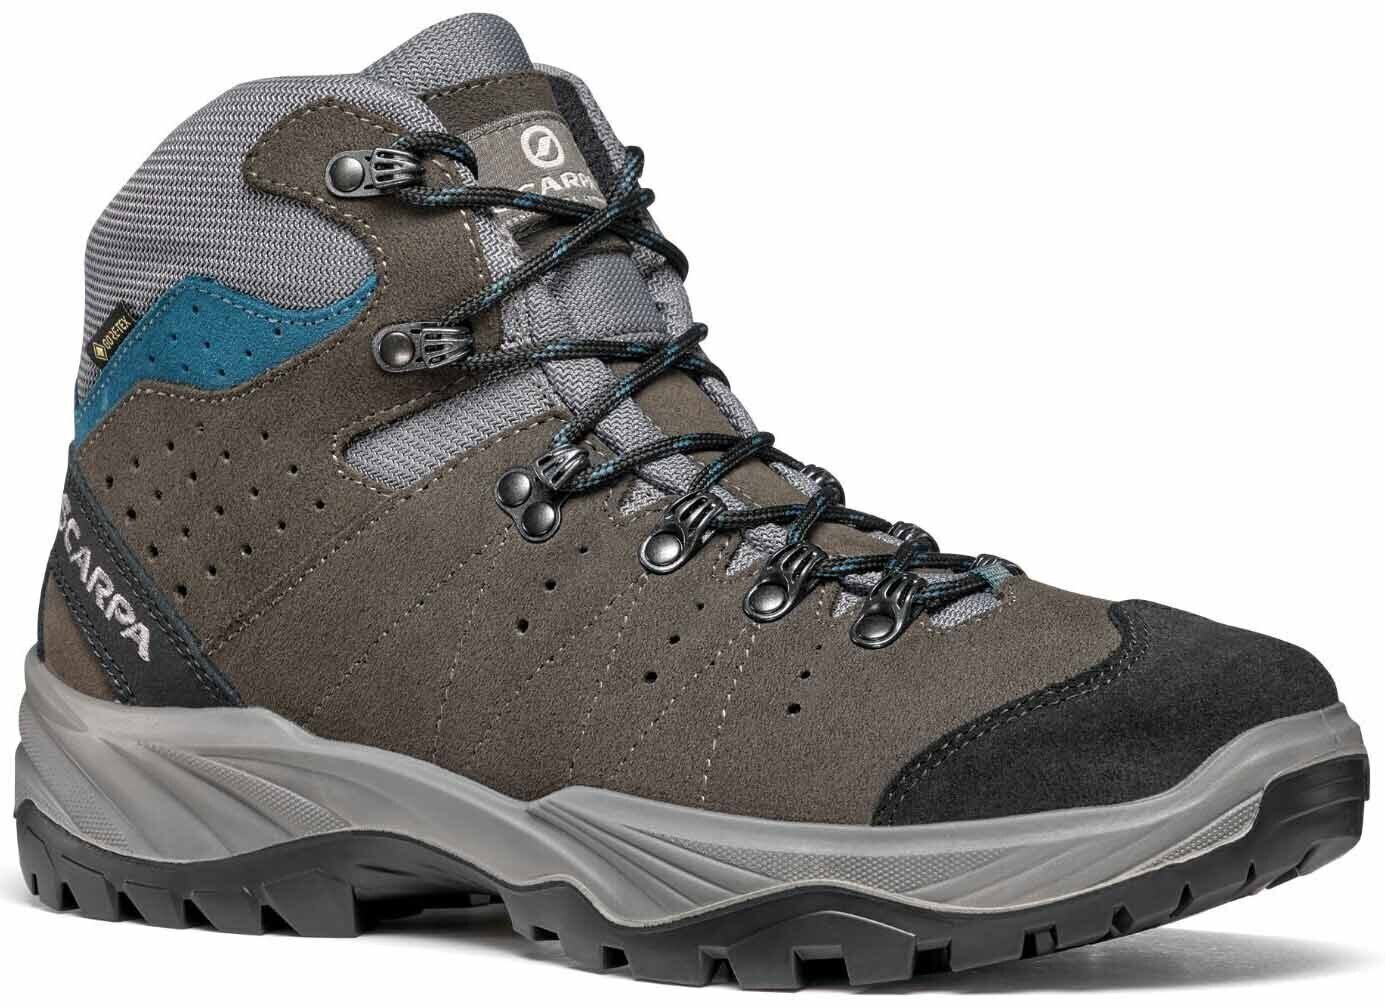 Chaussures outdoor hommes Scarpa Mistral Gore Tex Smoke/Lake Blue 47 Chaussures outdoor hommes